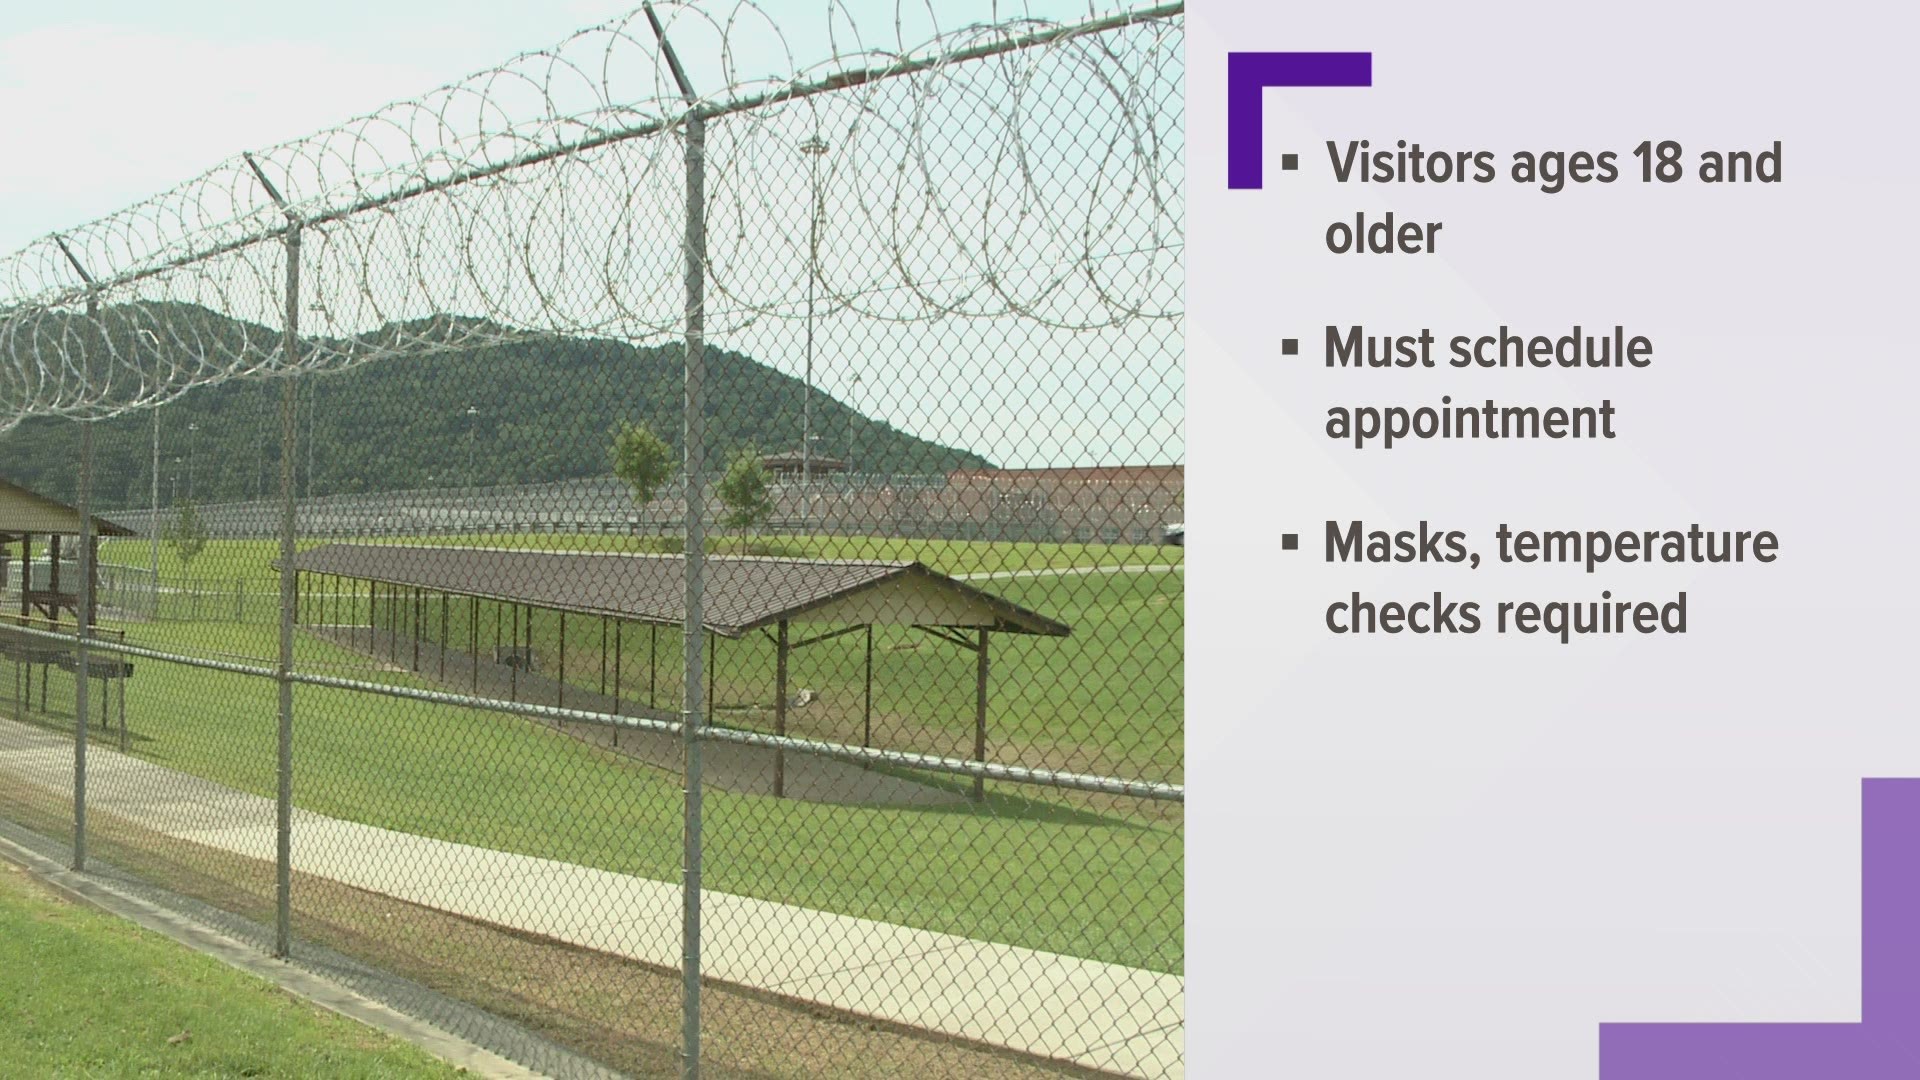 The state department of correction says visitors must be 18 or older and must schedule an appointment to maintain social distancing guidelines.